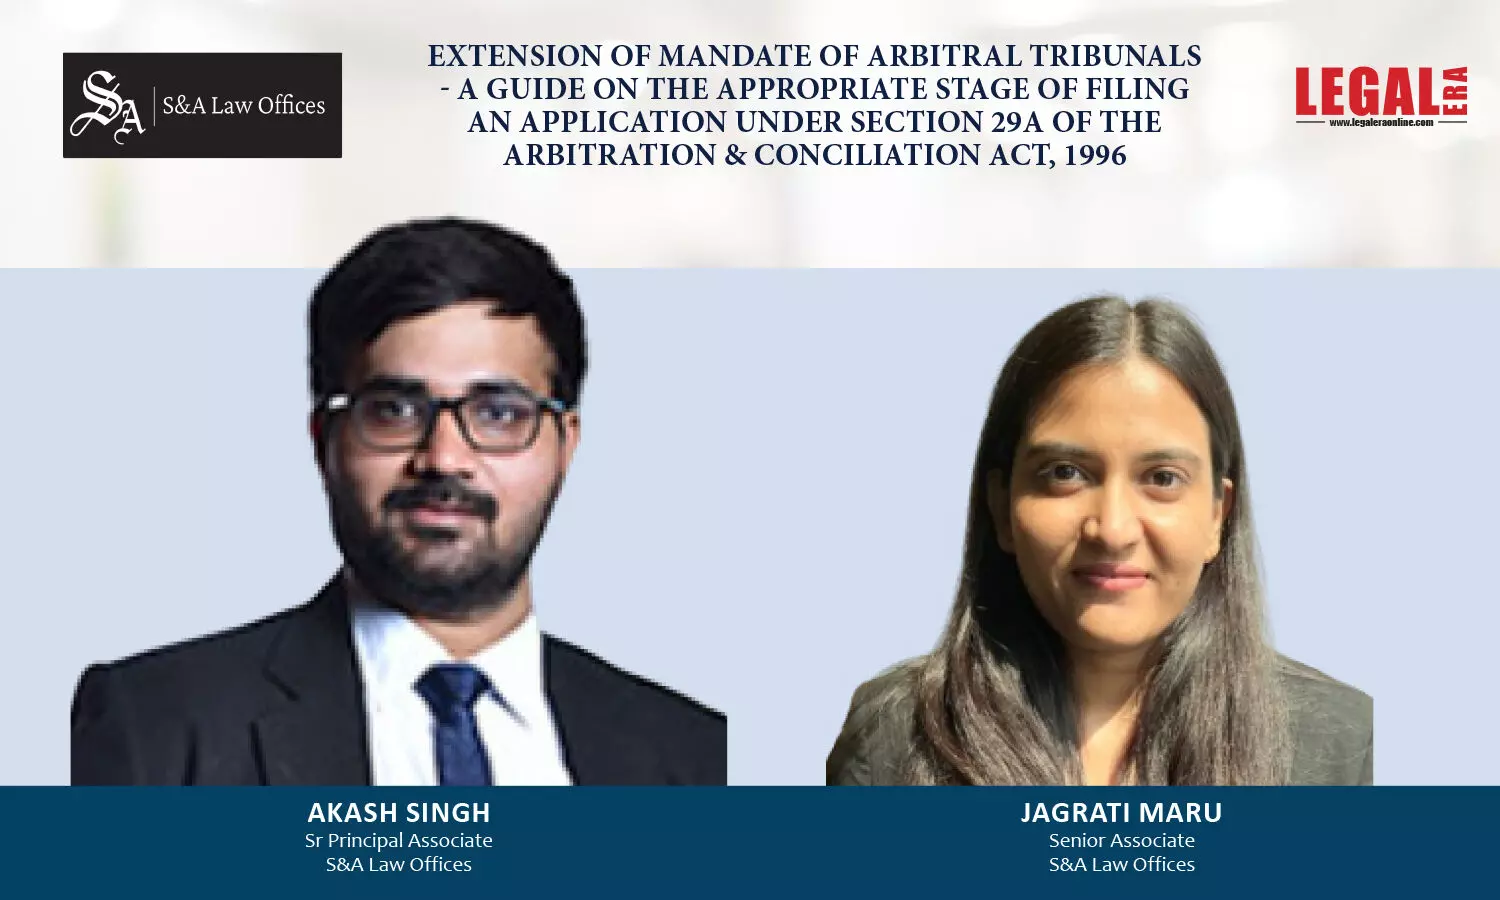 Extension Of Mandate Of Arbitral Tribunals - A Guide On The Appropriate Stage Of Filing An Application Under Section 29A Of The Arbitration & Conciliation Act, 1996